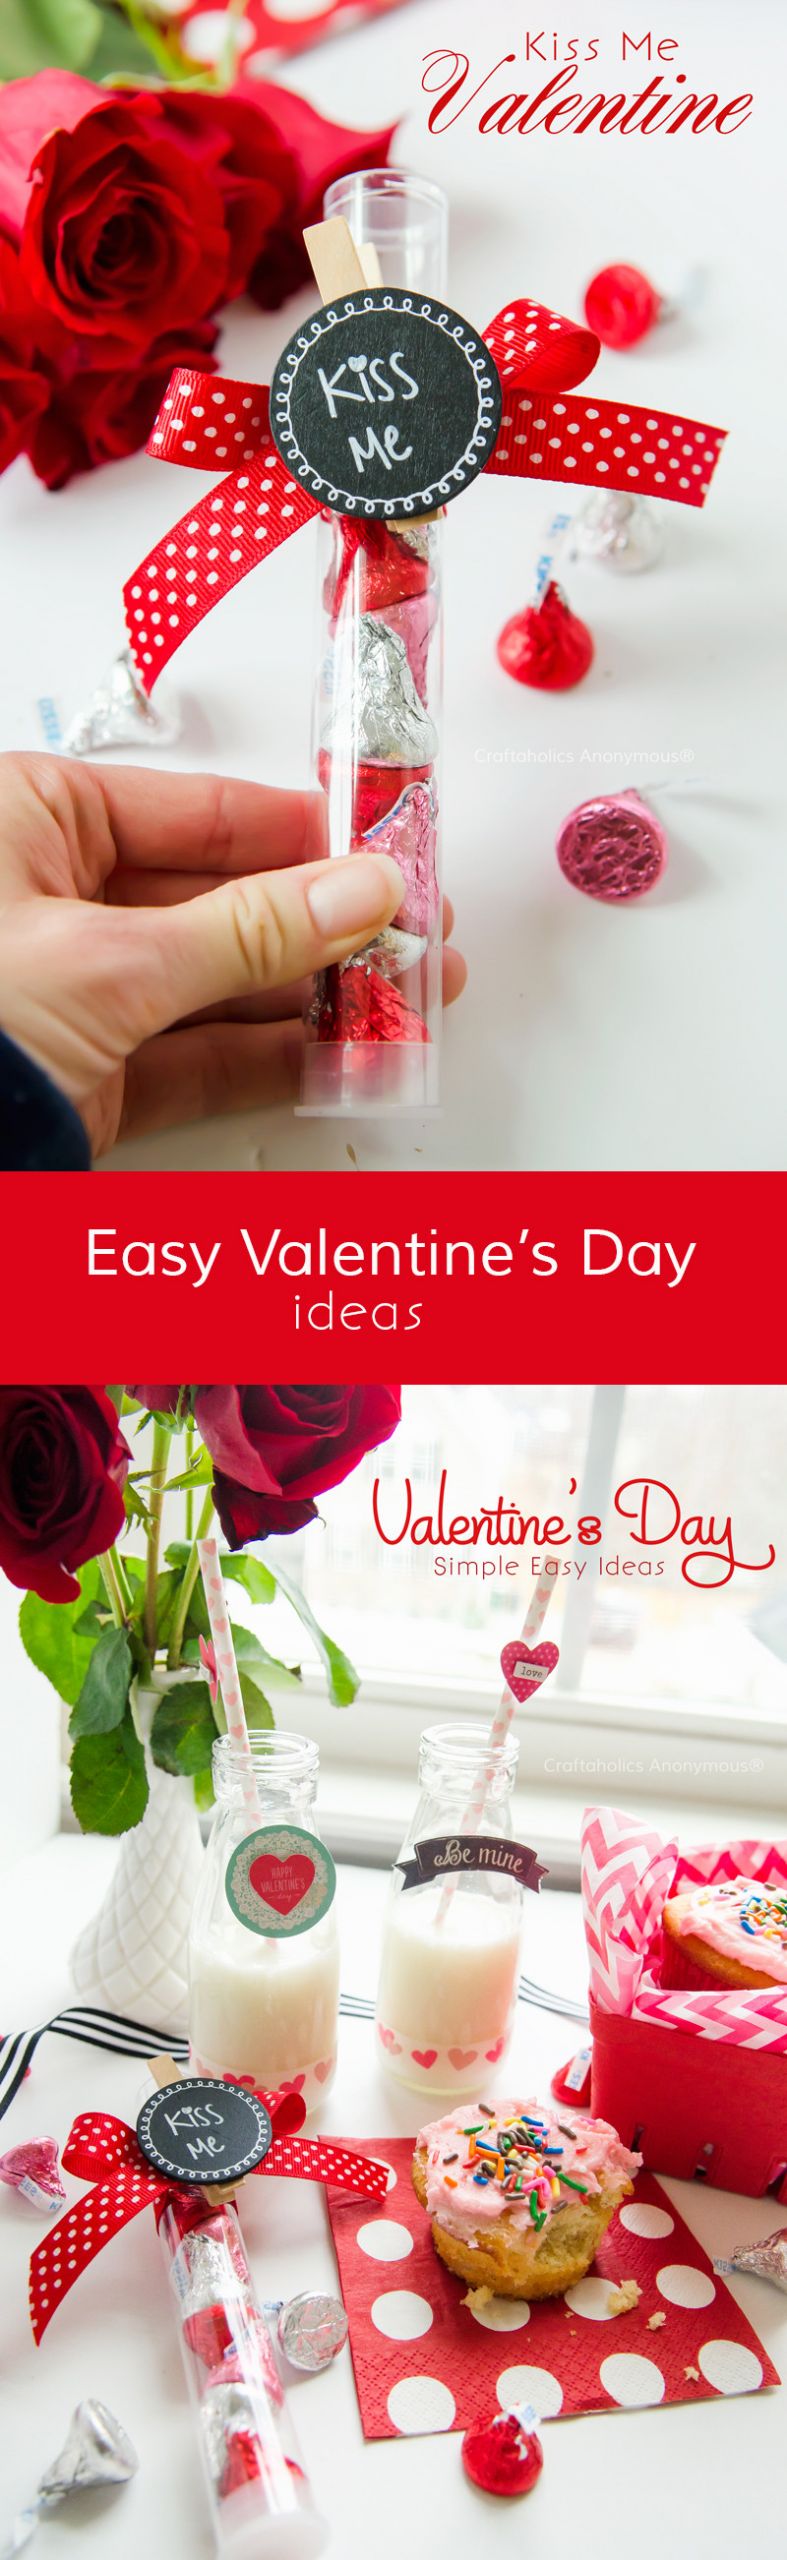 Cheap Valentines Day Ideas
 Craftaholics Anonymous